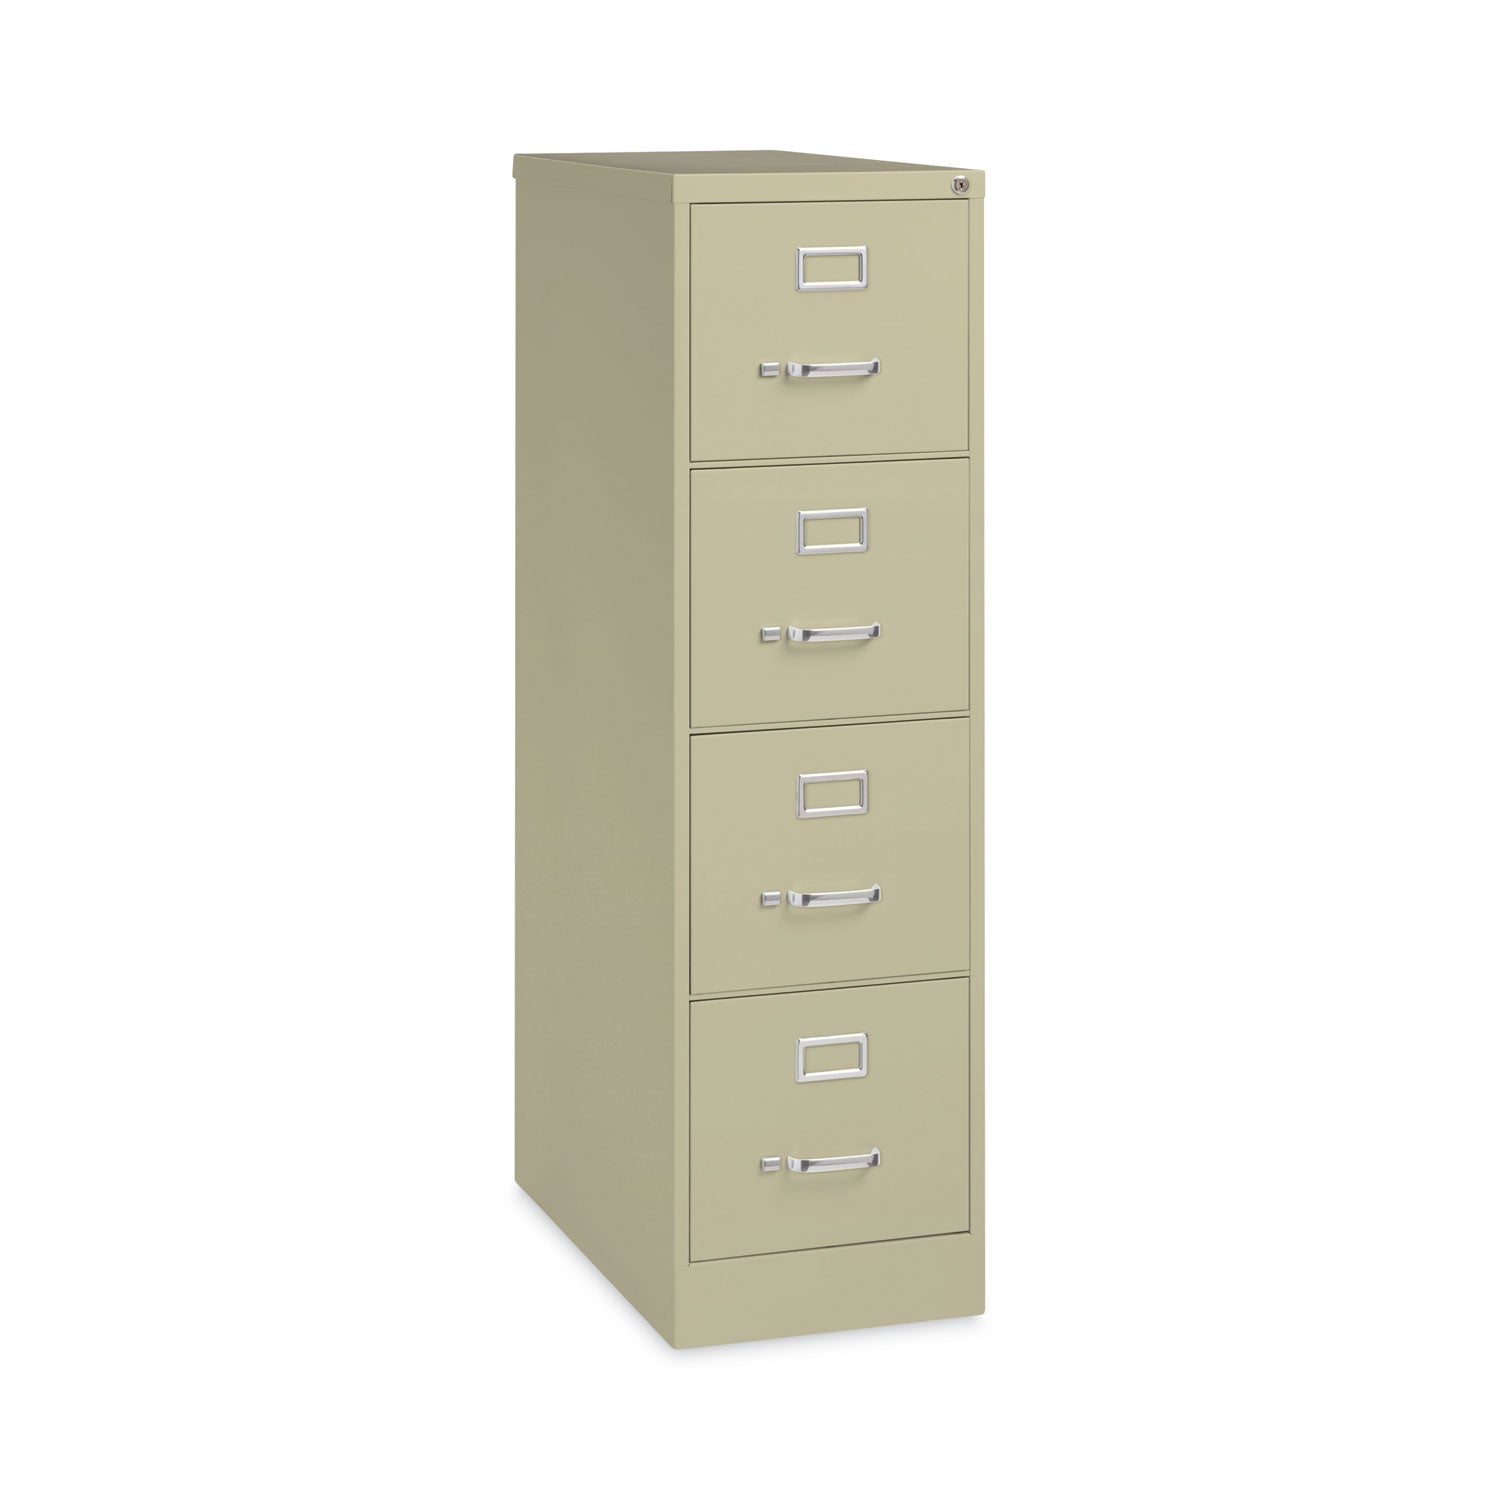 vertical-letter-file-cabinet-4-letter-size-file-drawers-putty-15-x-265-x-52_hid14028 - 3